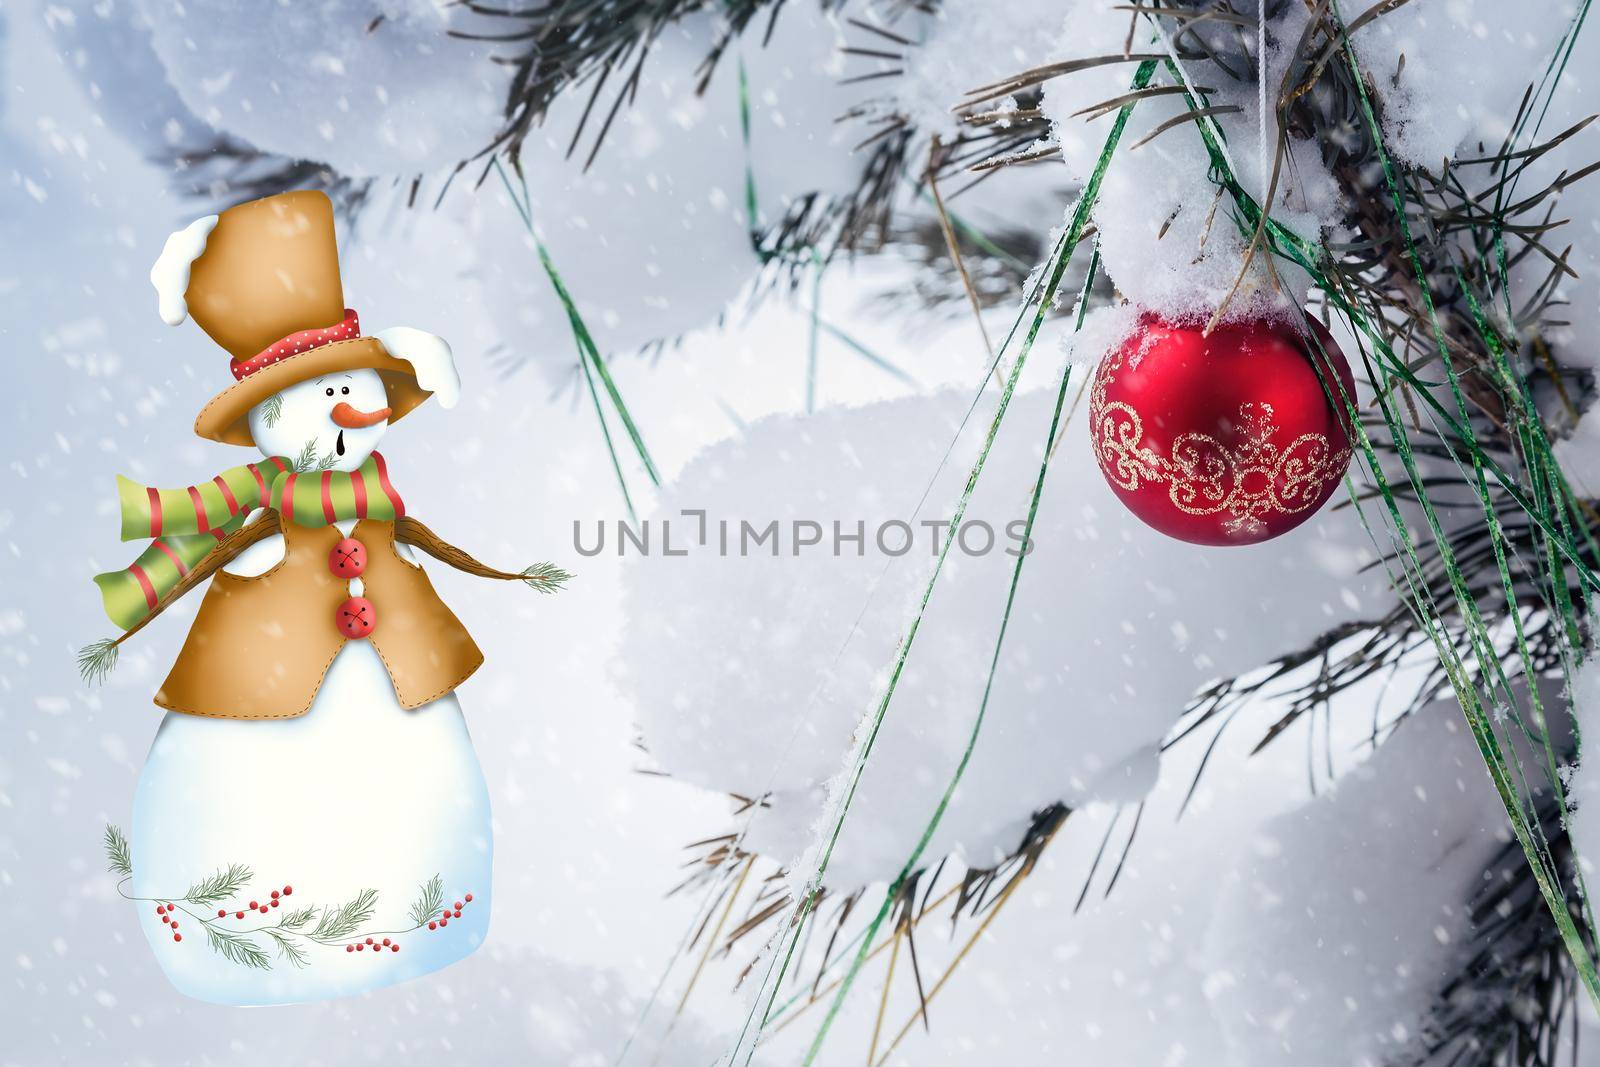 Beautiful Christmas card in vintage style with a picture of a snowman.